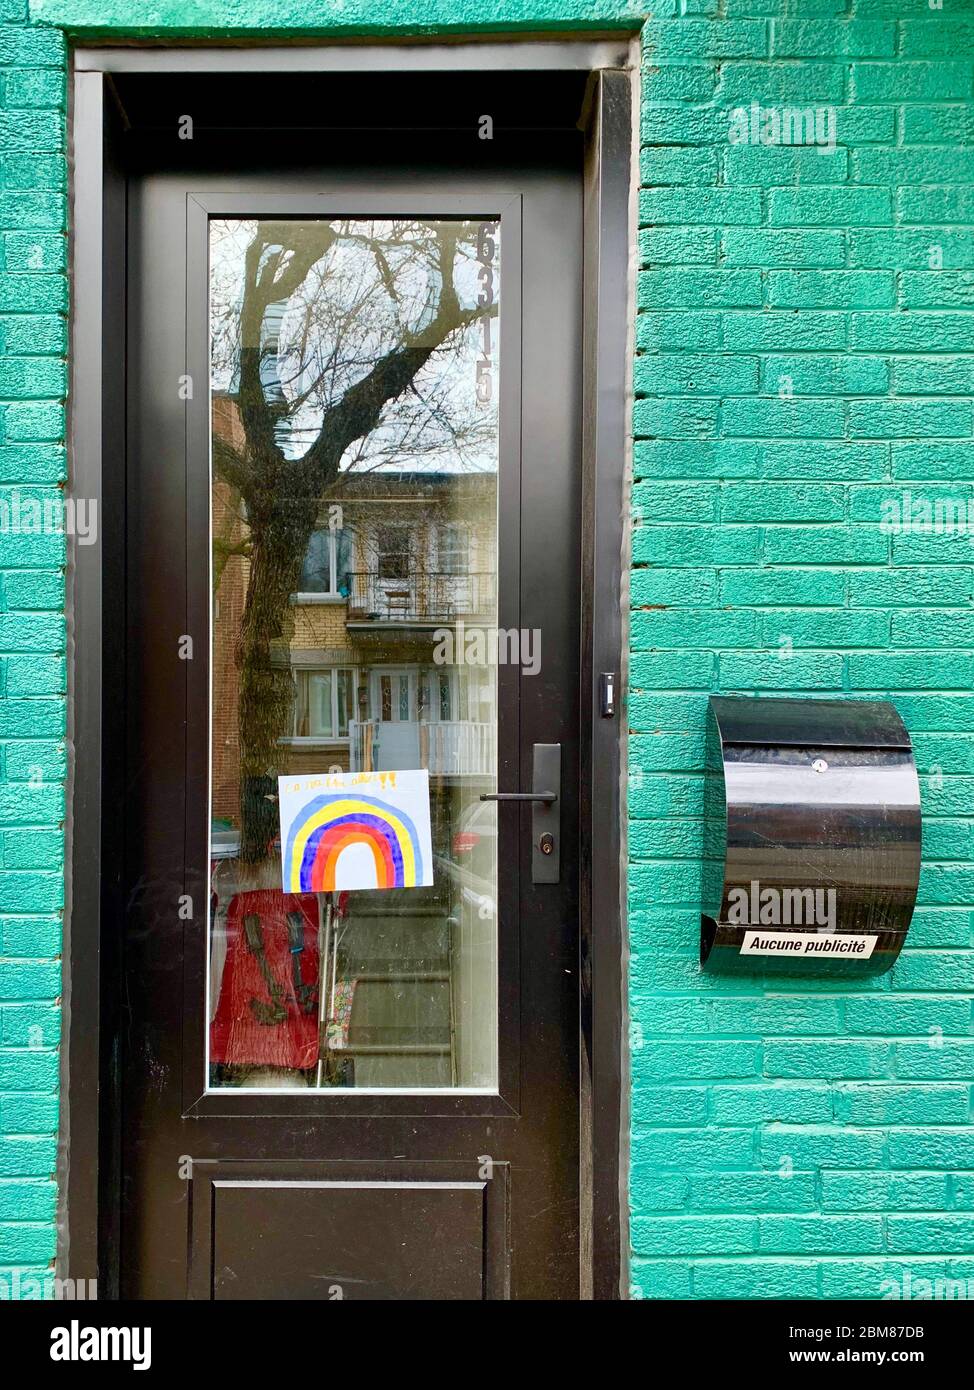 Rainbow of hope on a door in Montreal, Canada during the Covid19 Pandemic Stock Photo